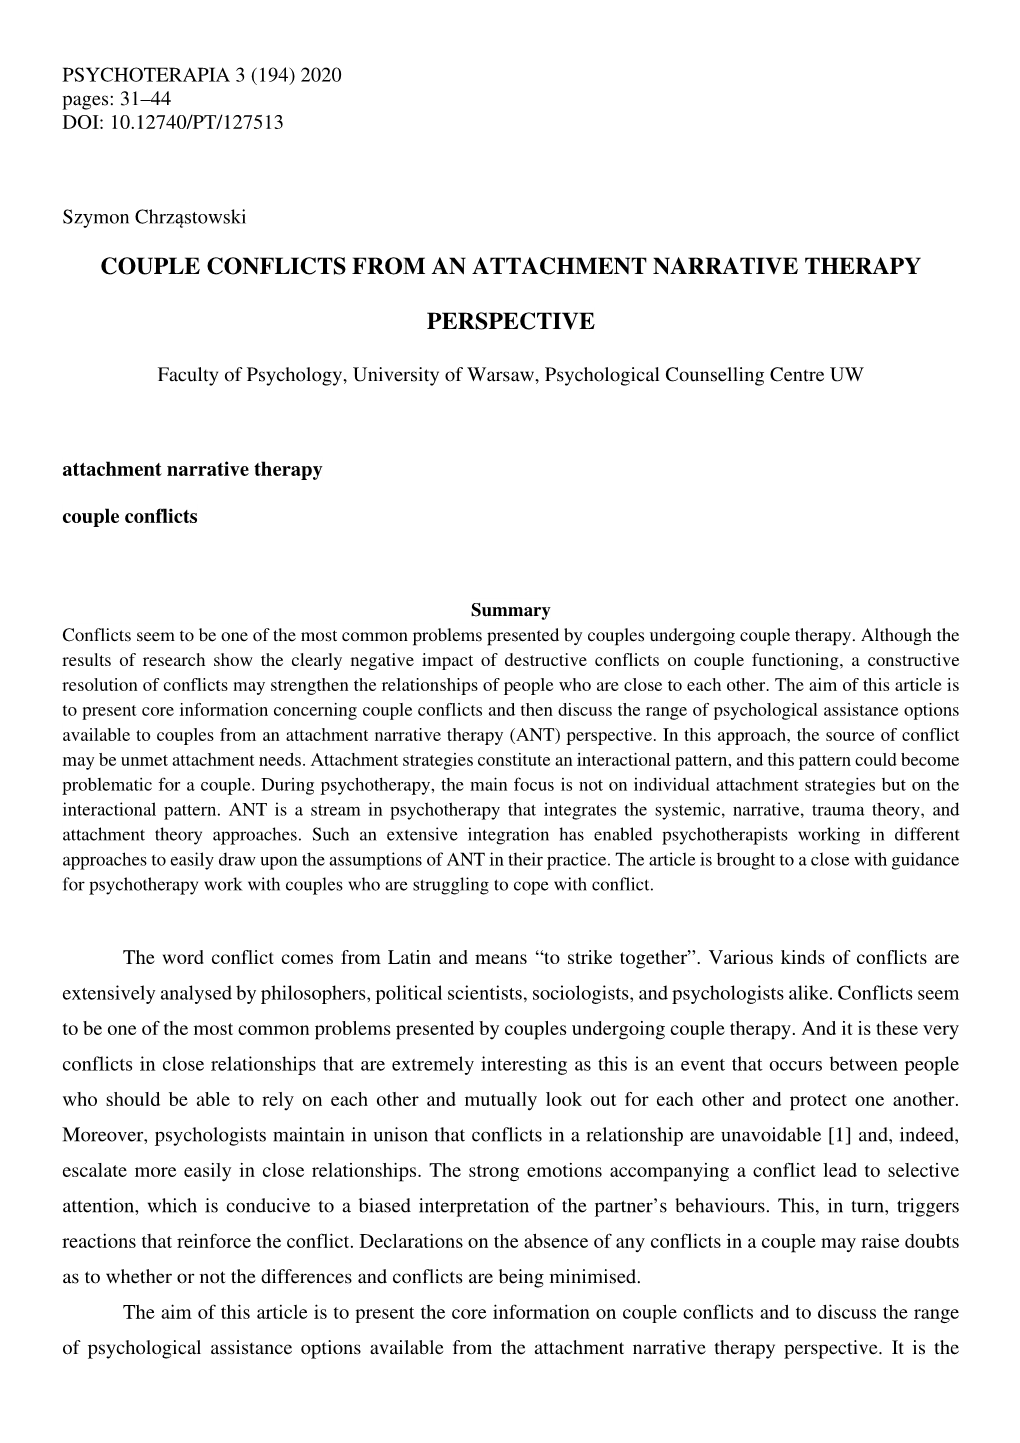 Couple Conflicts from an Attachment Narrative Therapy